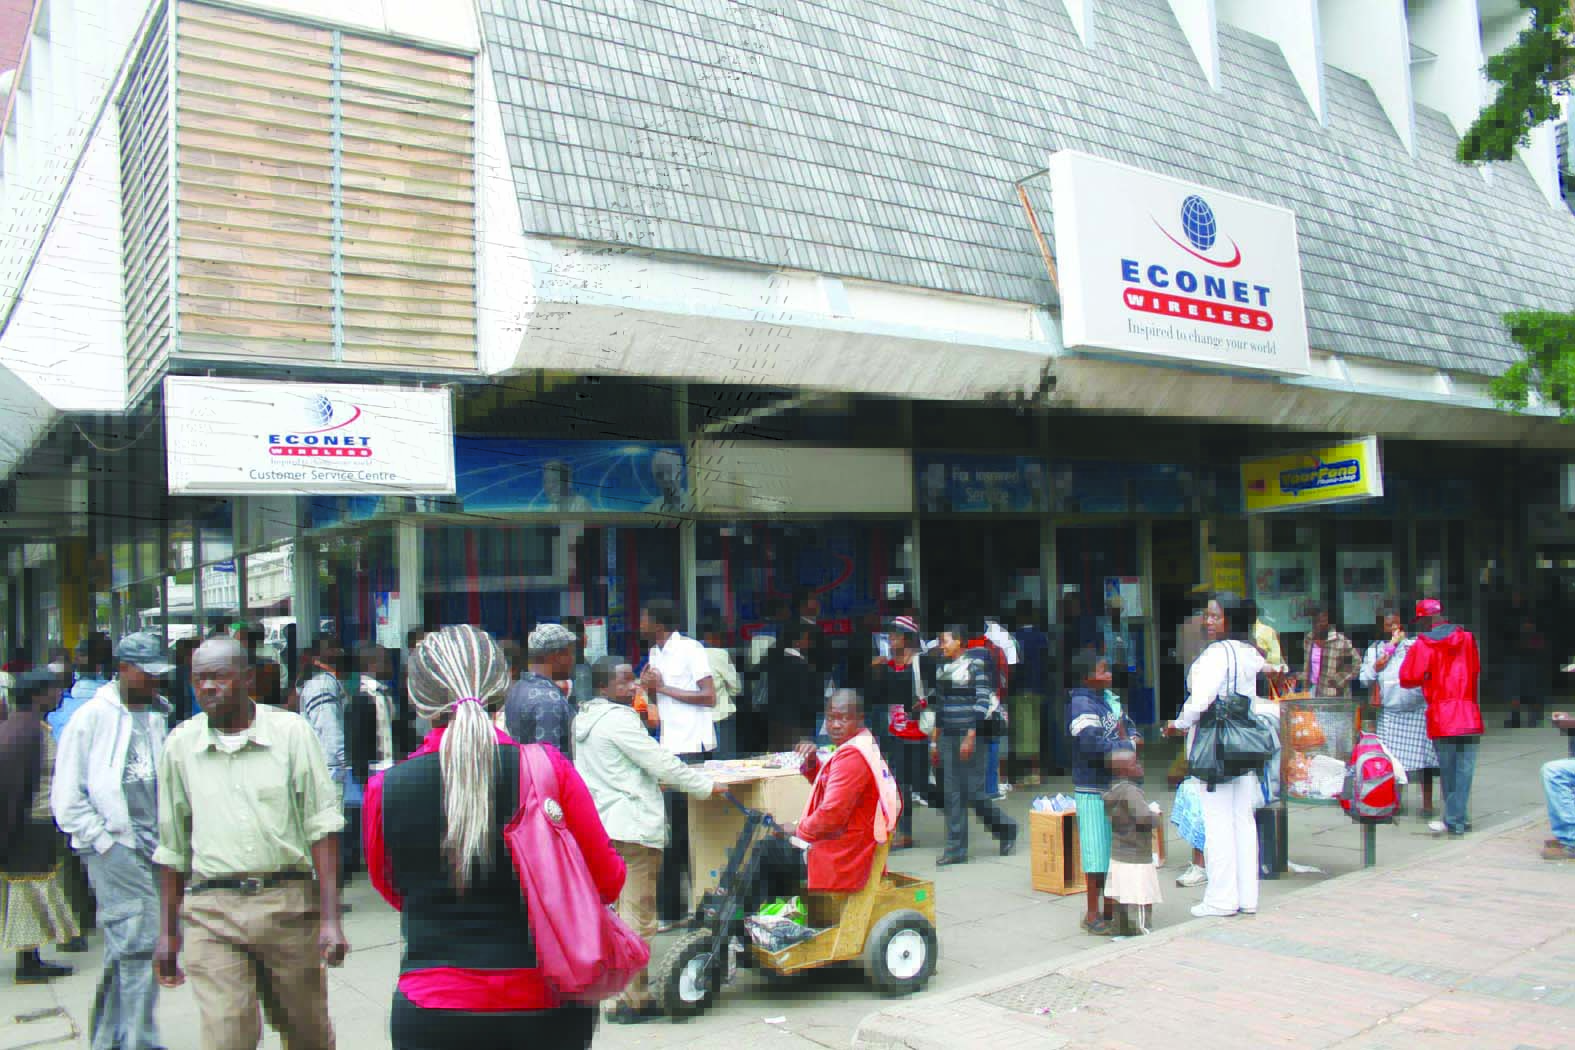 File picture of Econet shop in the Harare City Centre